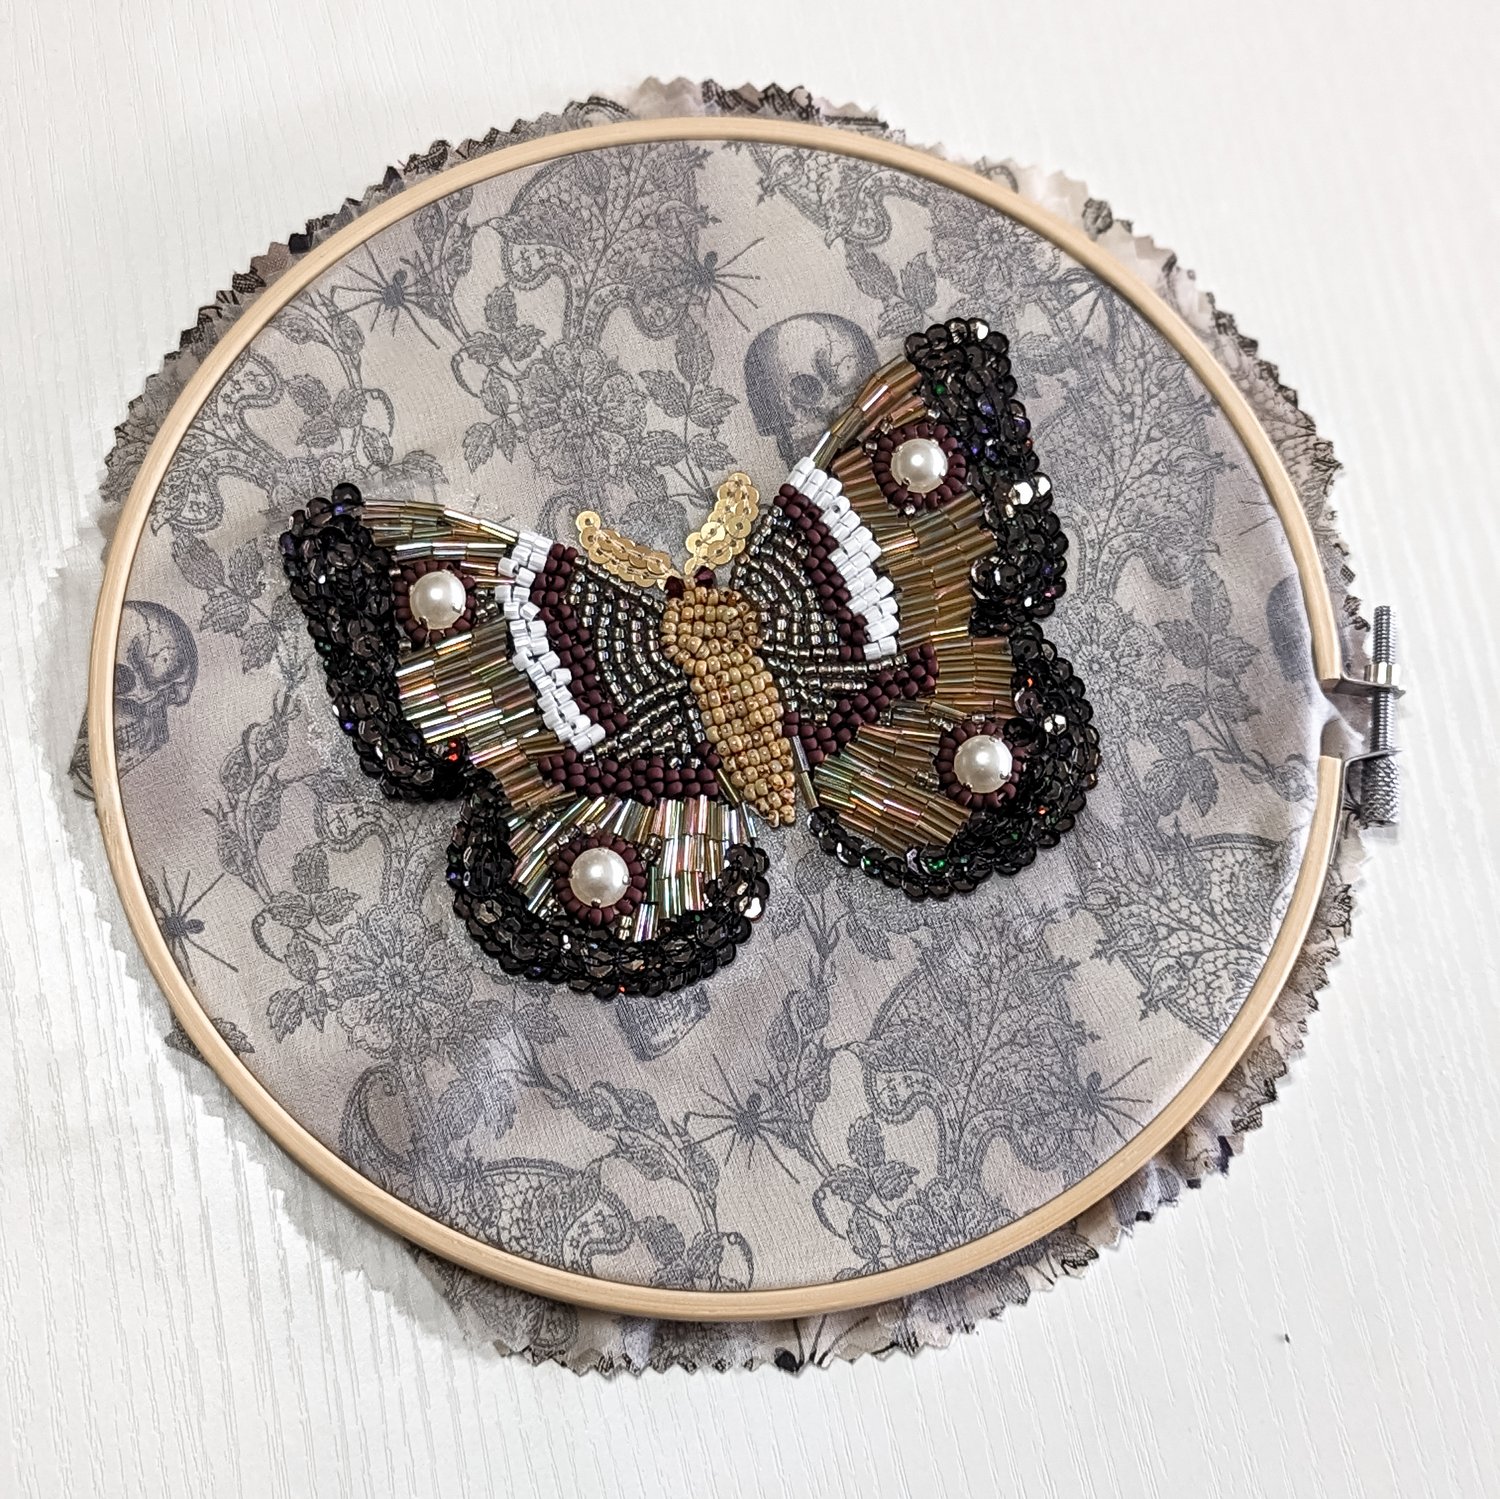 New Tambour Embroidery kits available on my website!